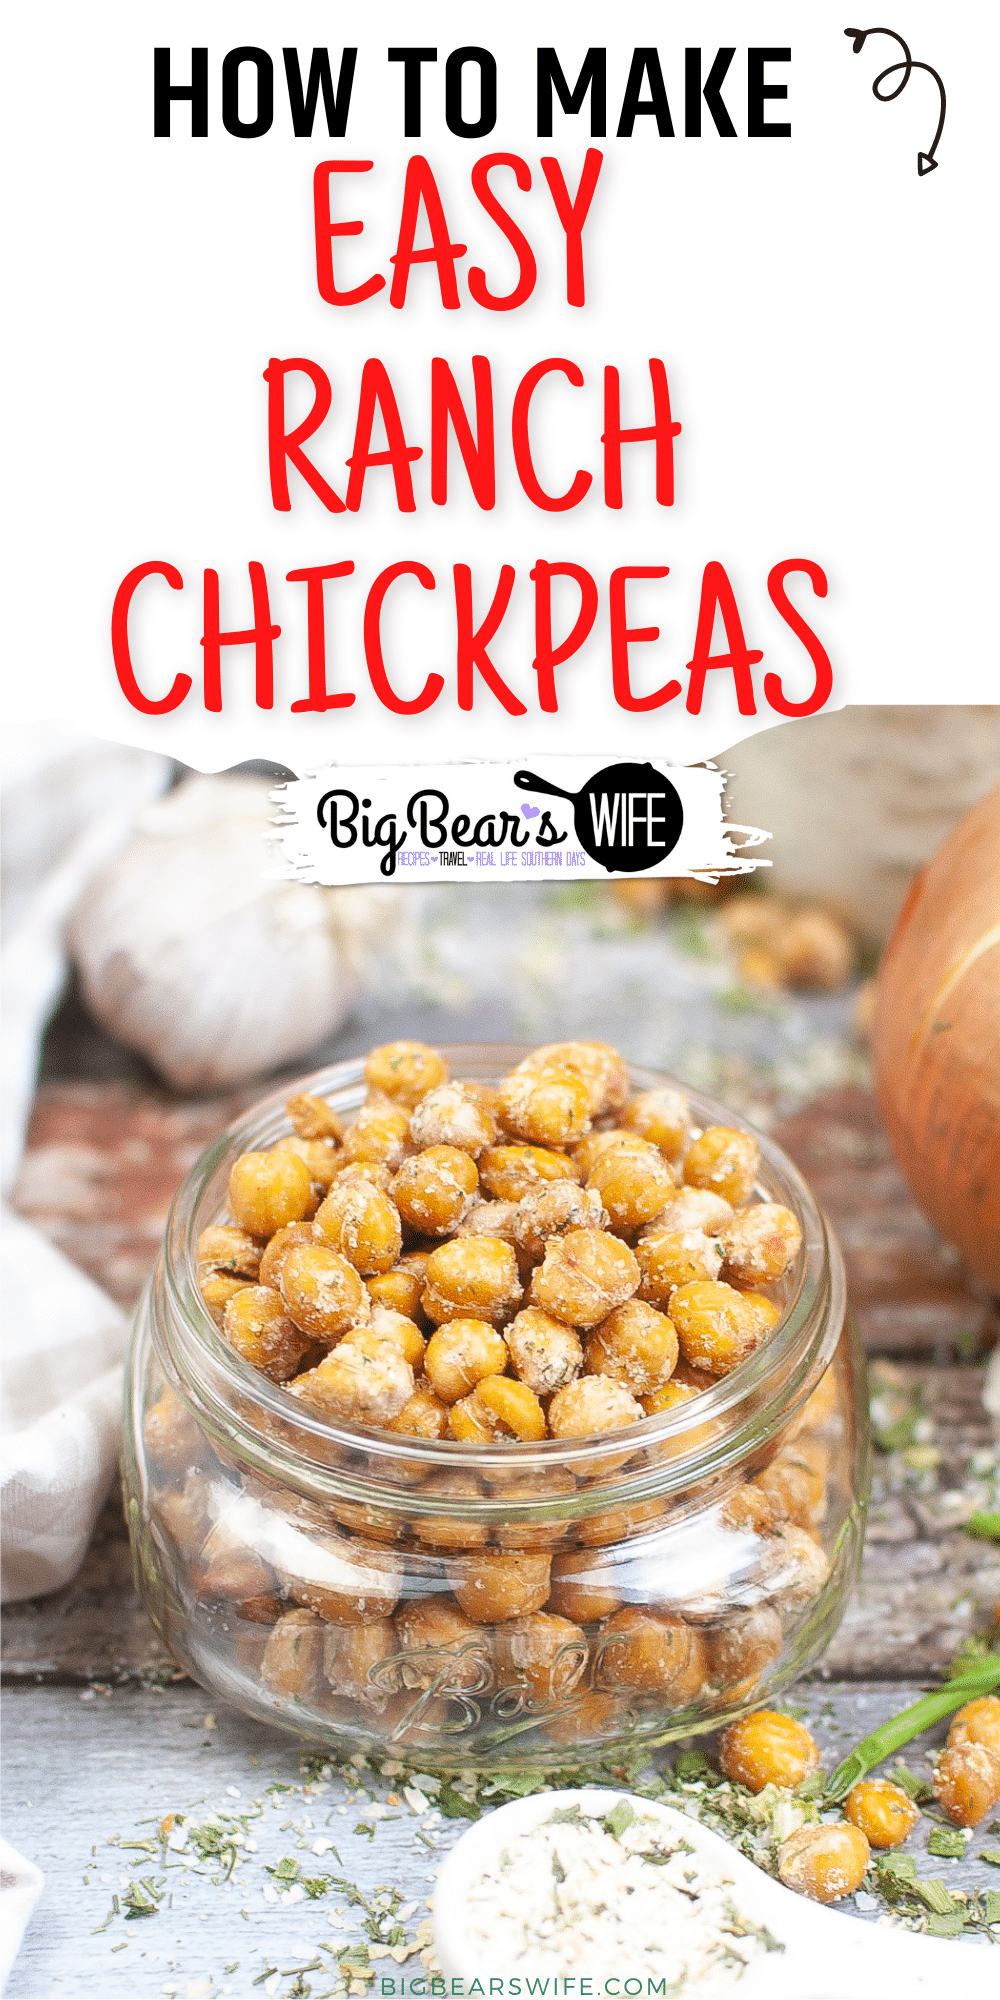 These crispy Air Fryer Ranch Chickpeas are a great snack and super easy to make! Air Fryer Chickpeas with a homemade ranch seasoning!  via @bigbearswife